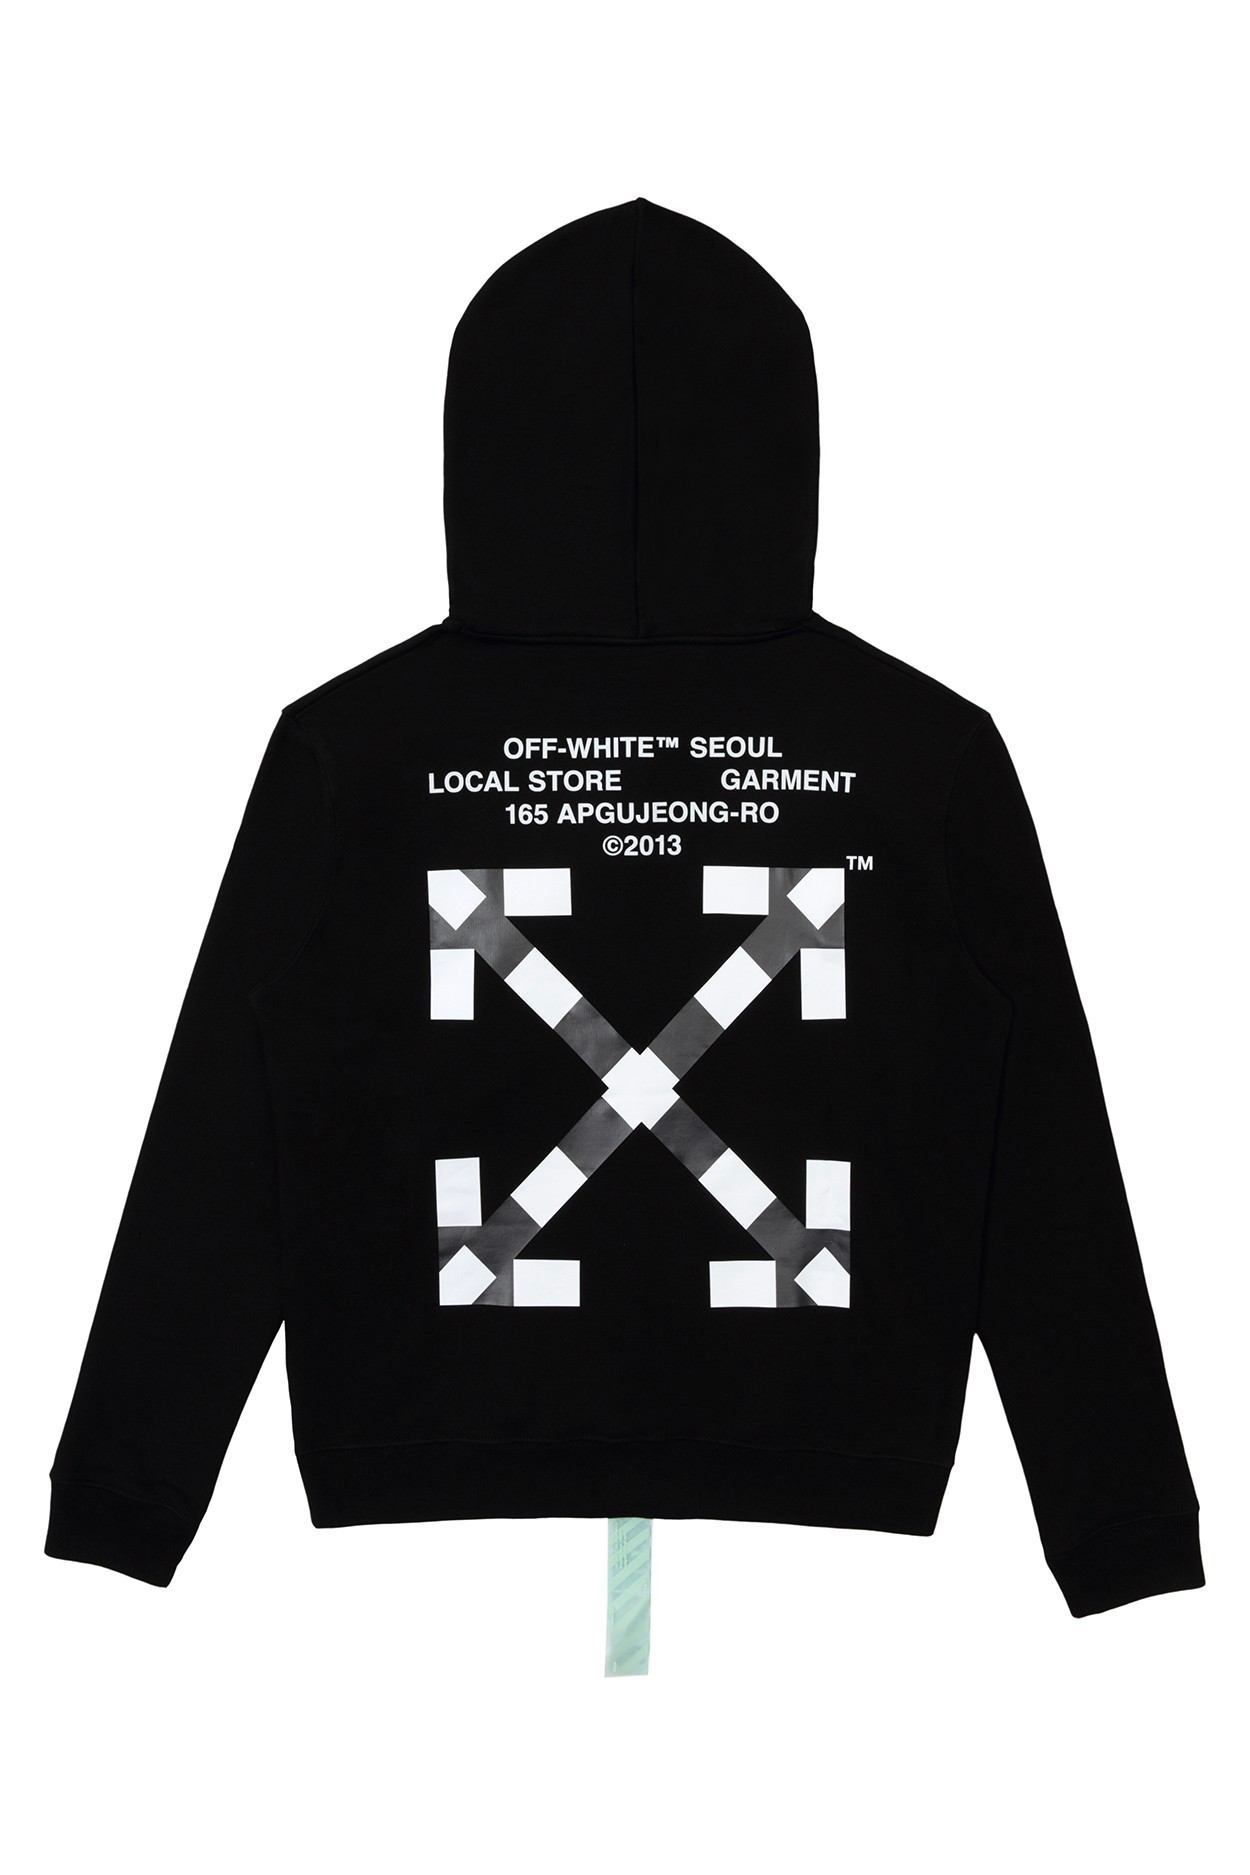 OFF-WHITE™ Launches Its “City Garments” Capsule Collection - The